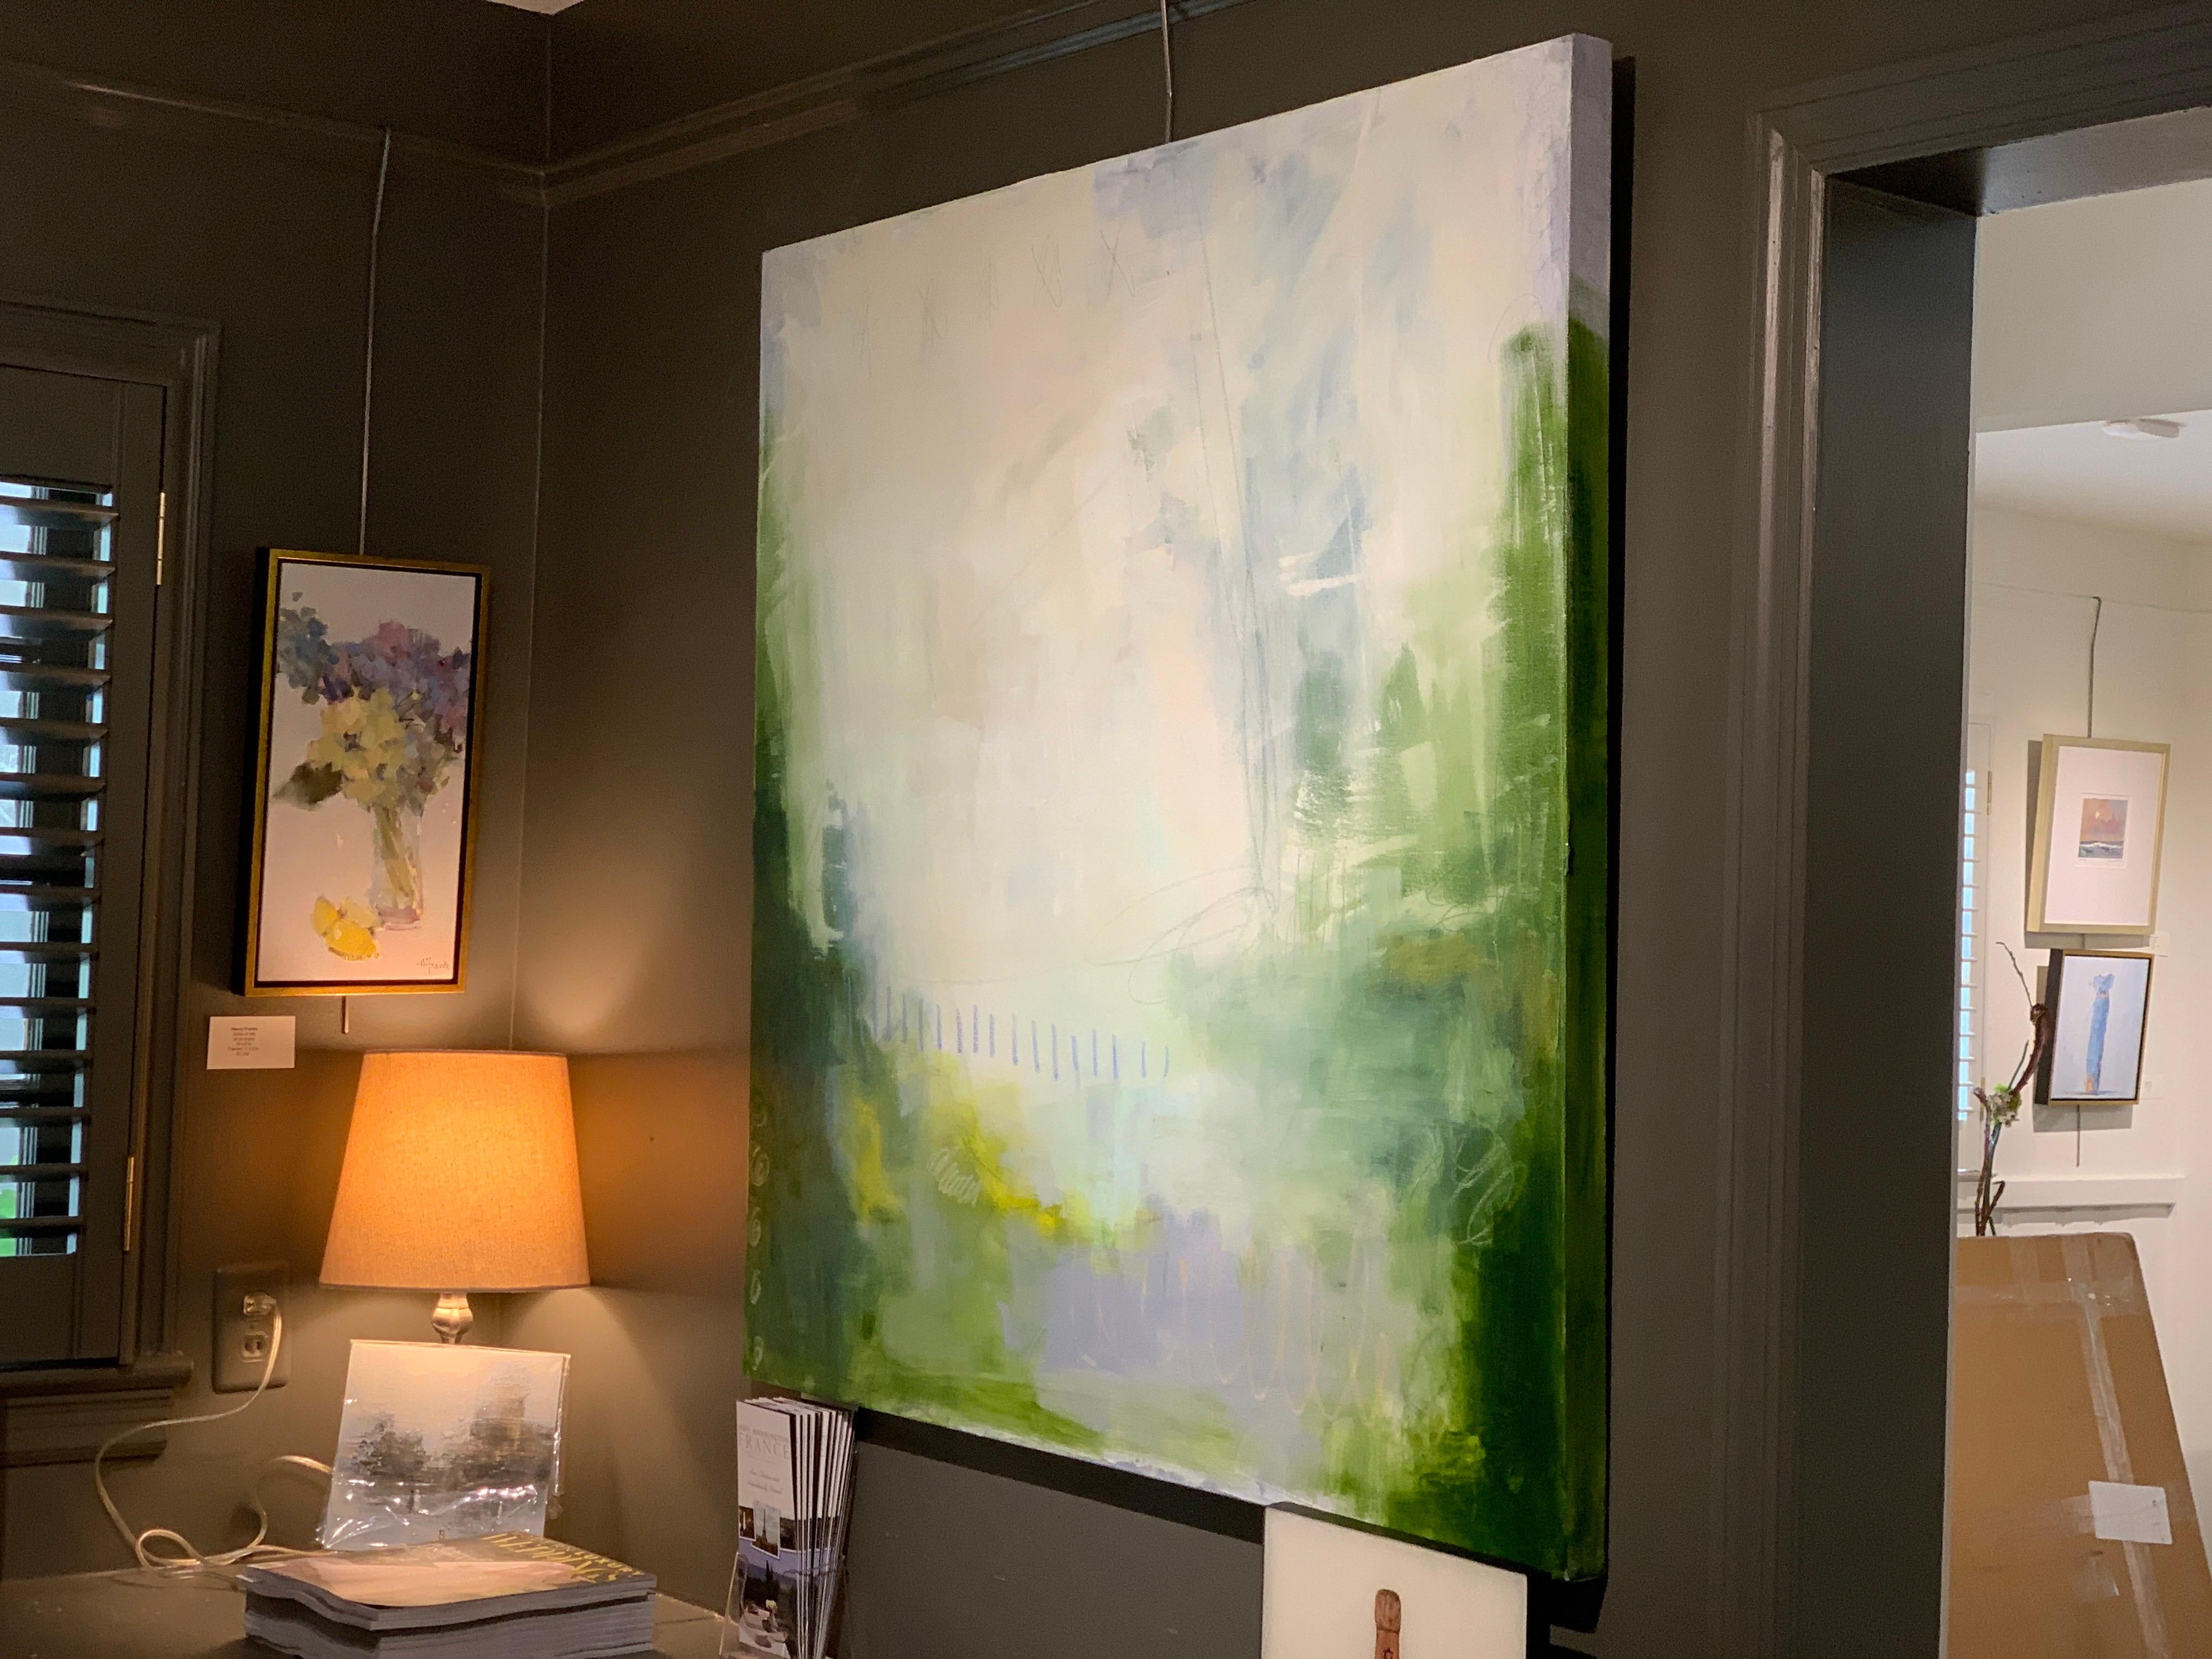 'Rendezvous in the Garden' is a large abstract oil on canvas painting created by American artist Augusta Wilson in 2021. Featuring a large square format, this painting is adorned with a cream and white background that is the perfect setting to